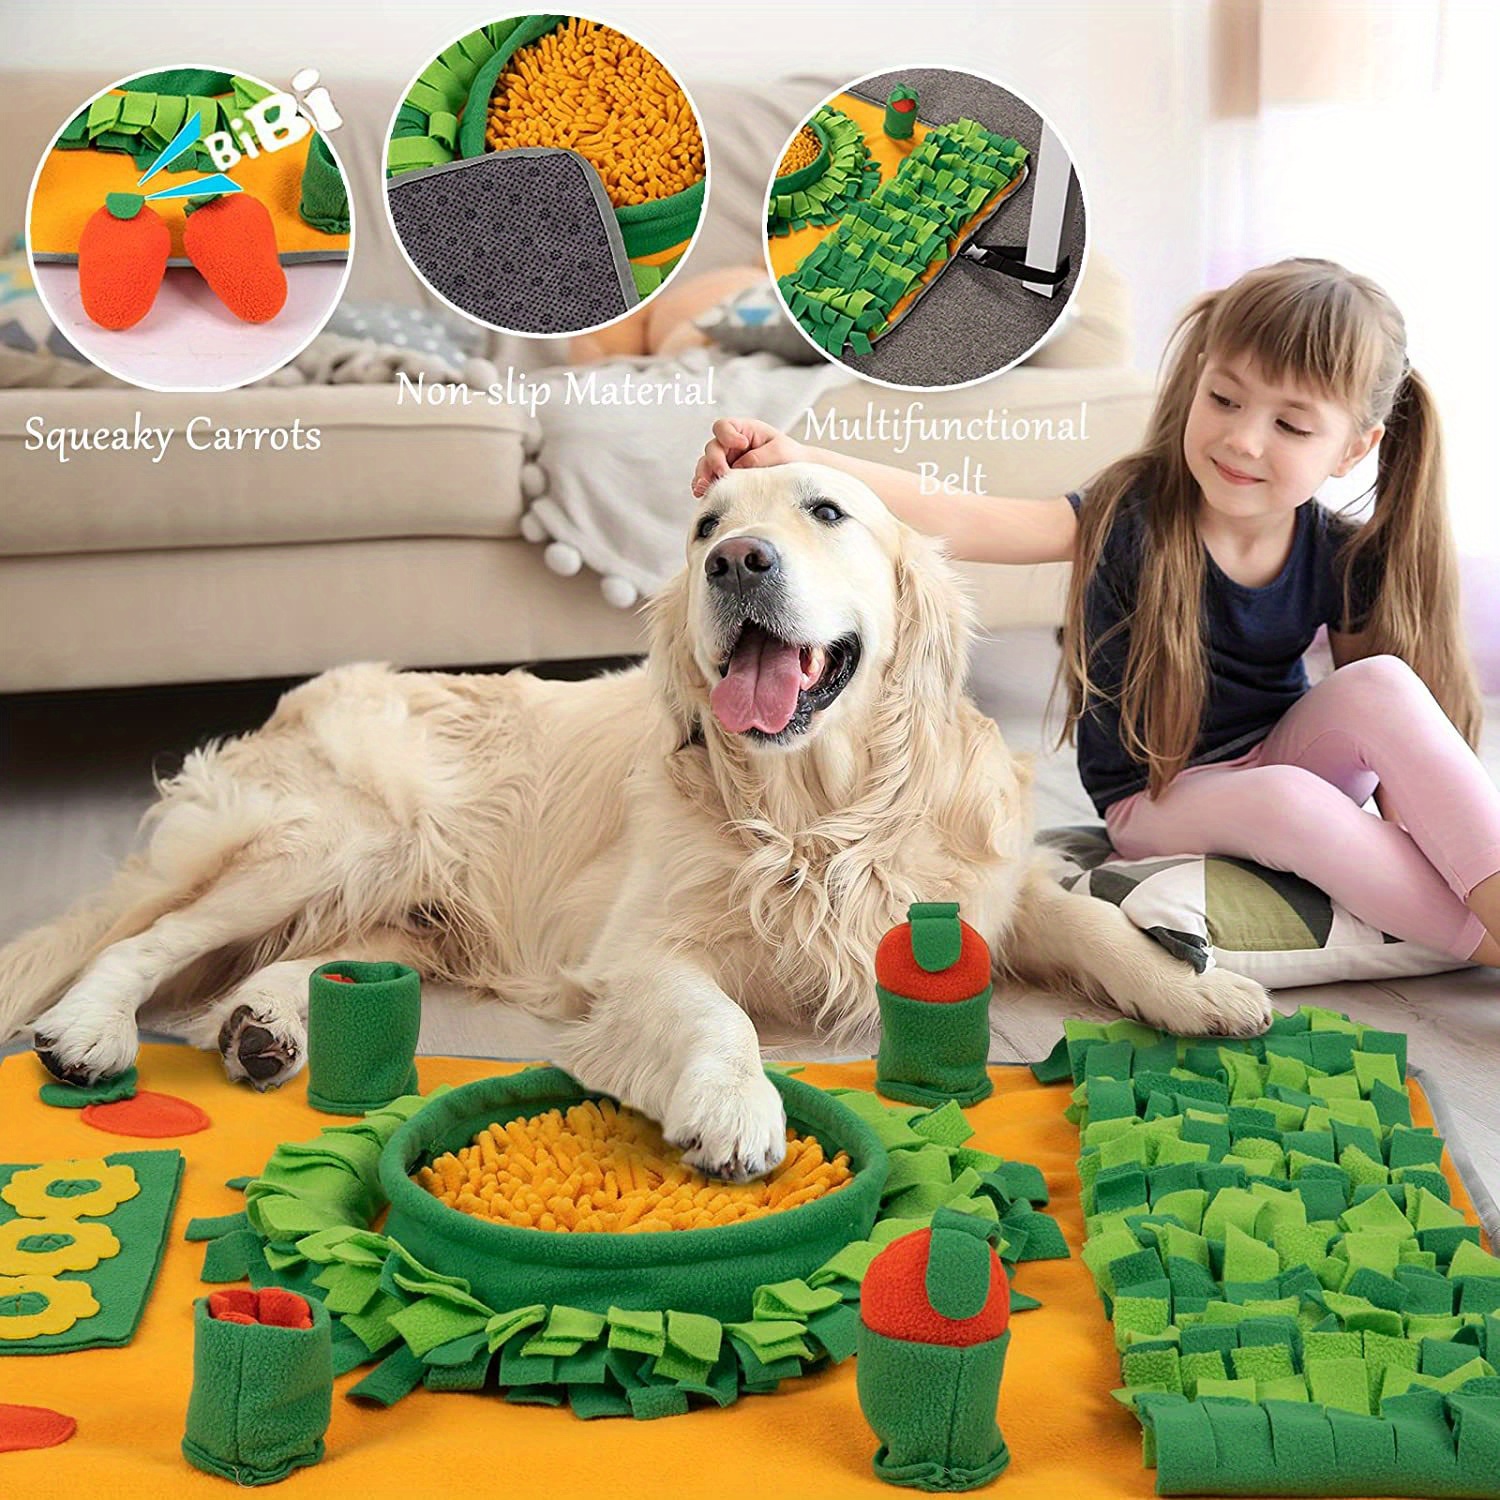 Dog Sniffing Mat Dog Sniffing Pad Dog Snuffle Mat Slow Feeding Stress  Relief Enrichment for Pet Foraging A Washable Large-sized